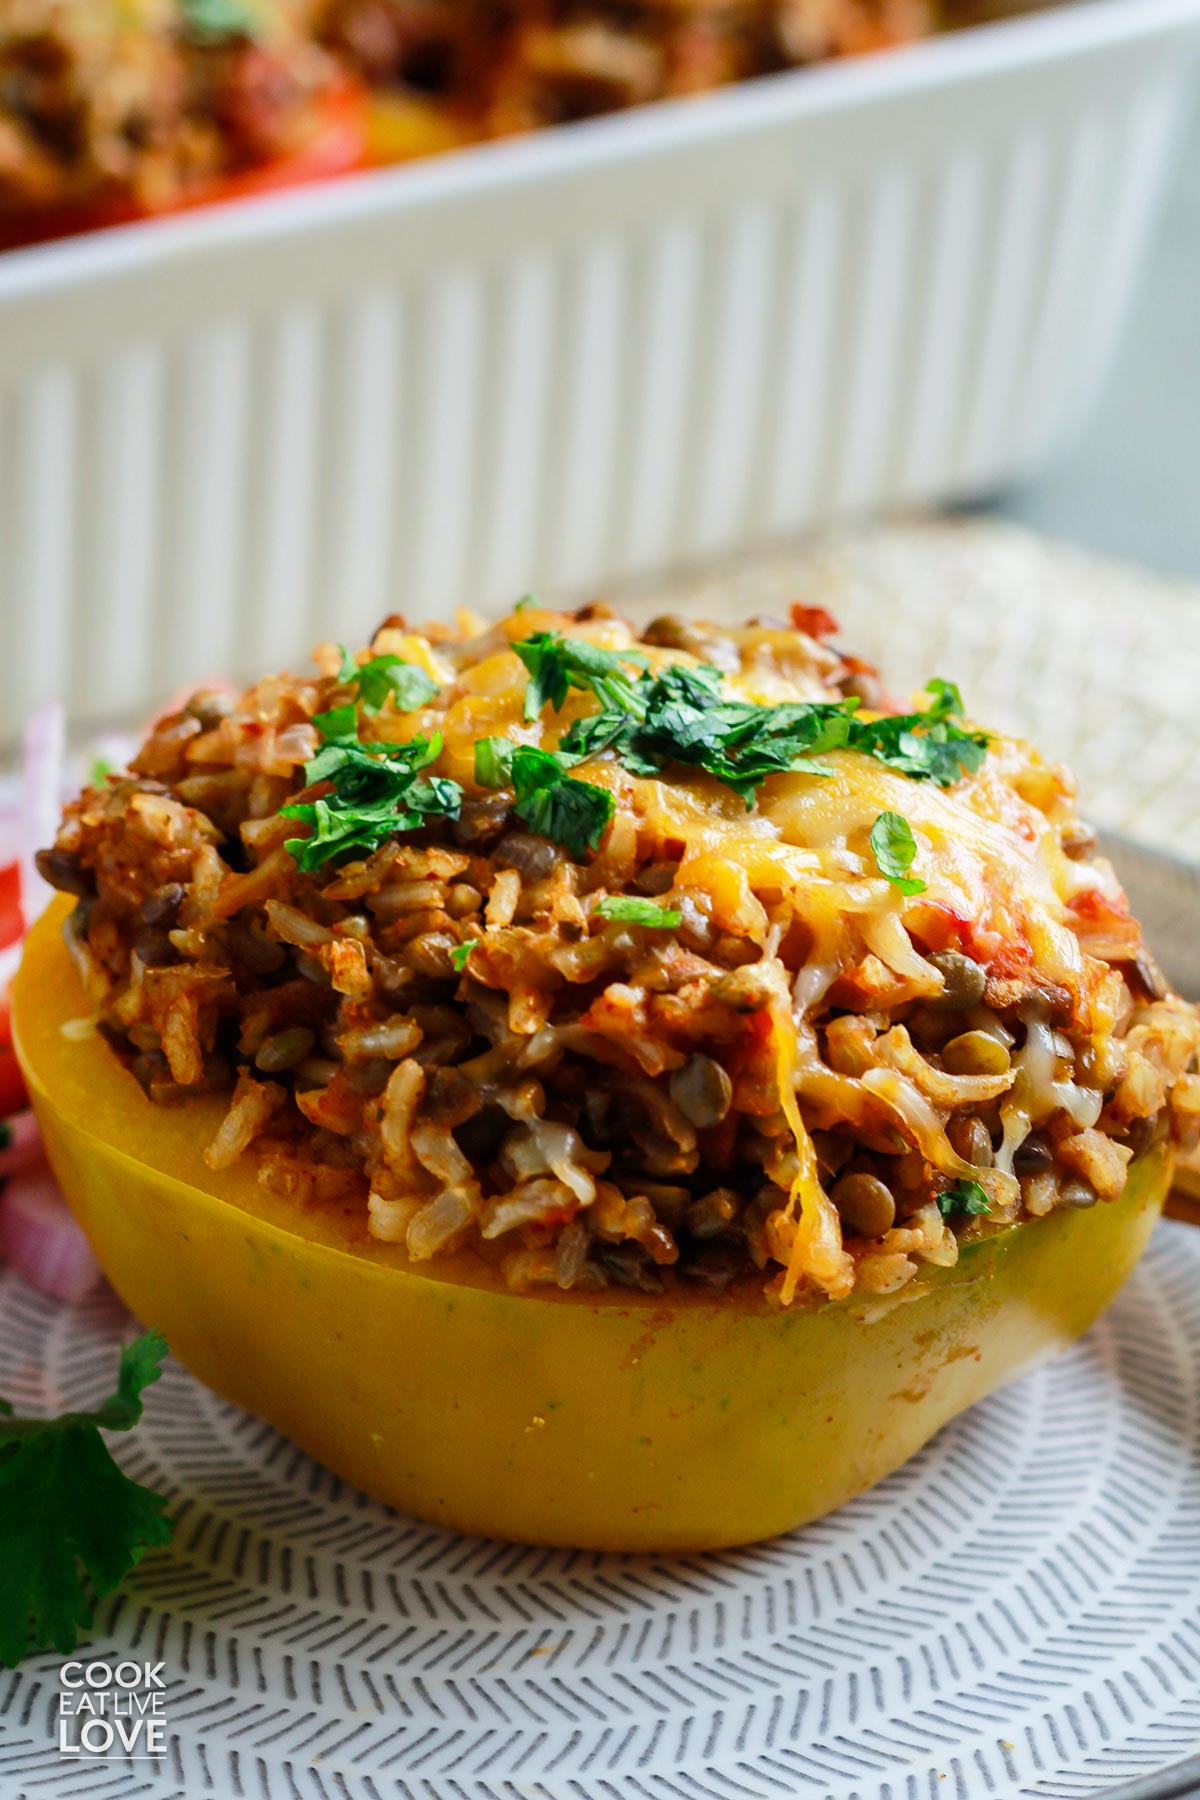 Rice and lentil stuffed peppers on a plate with wooden fork and knife